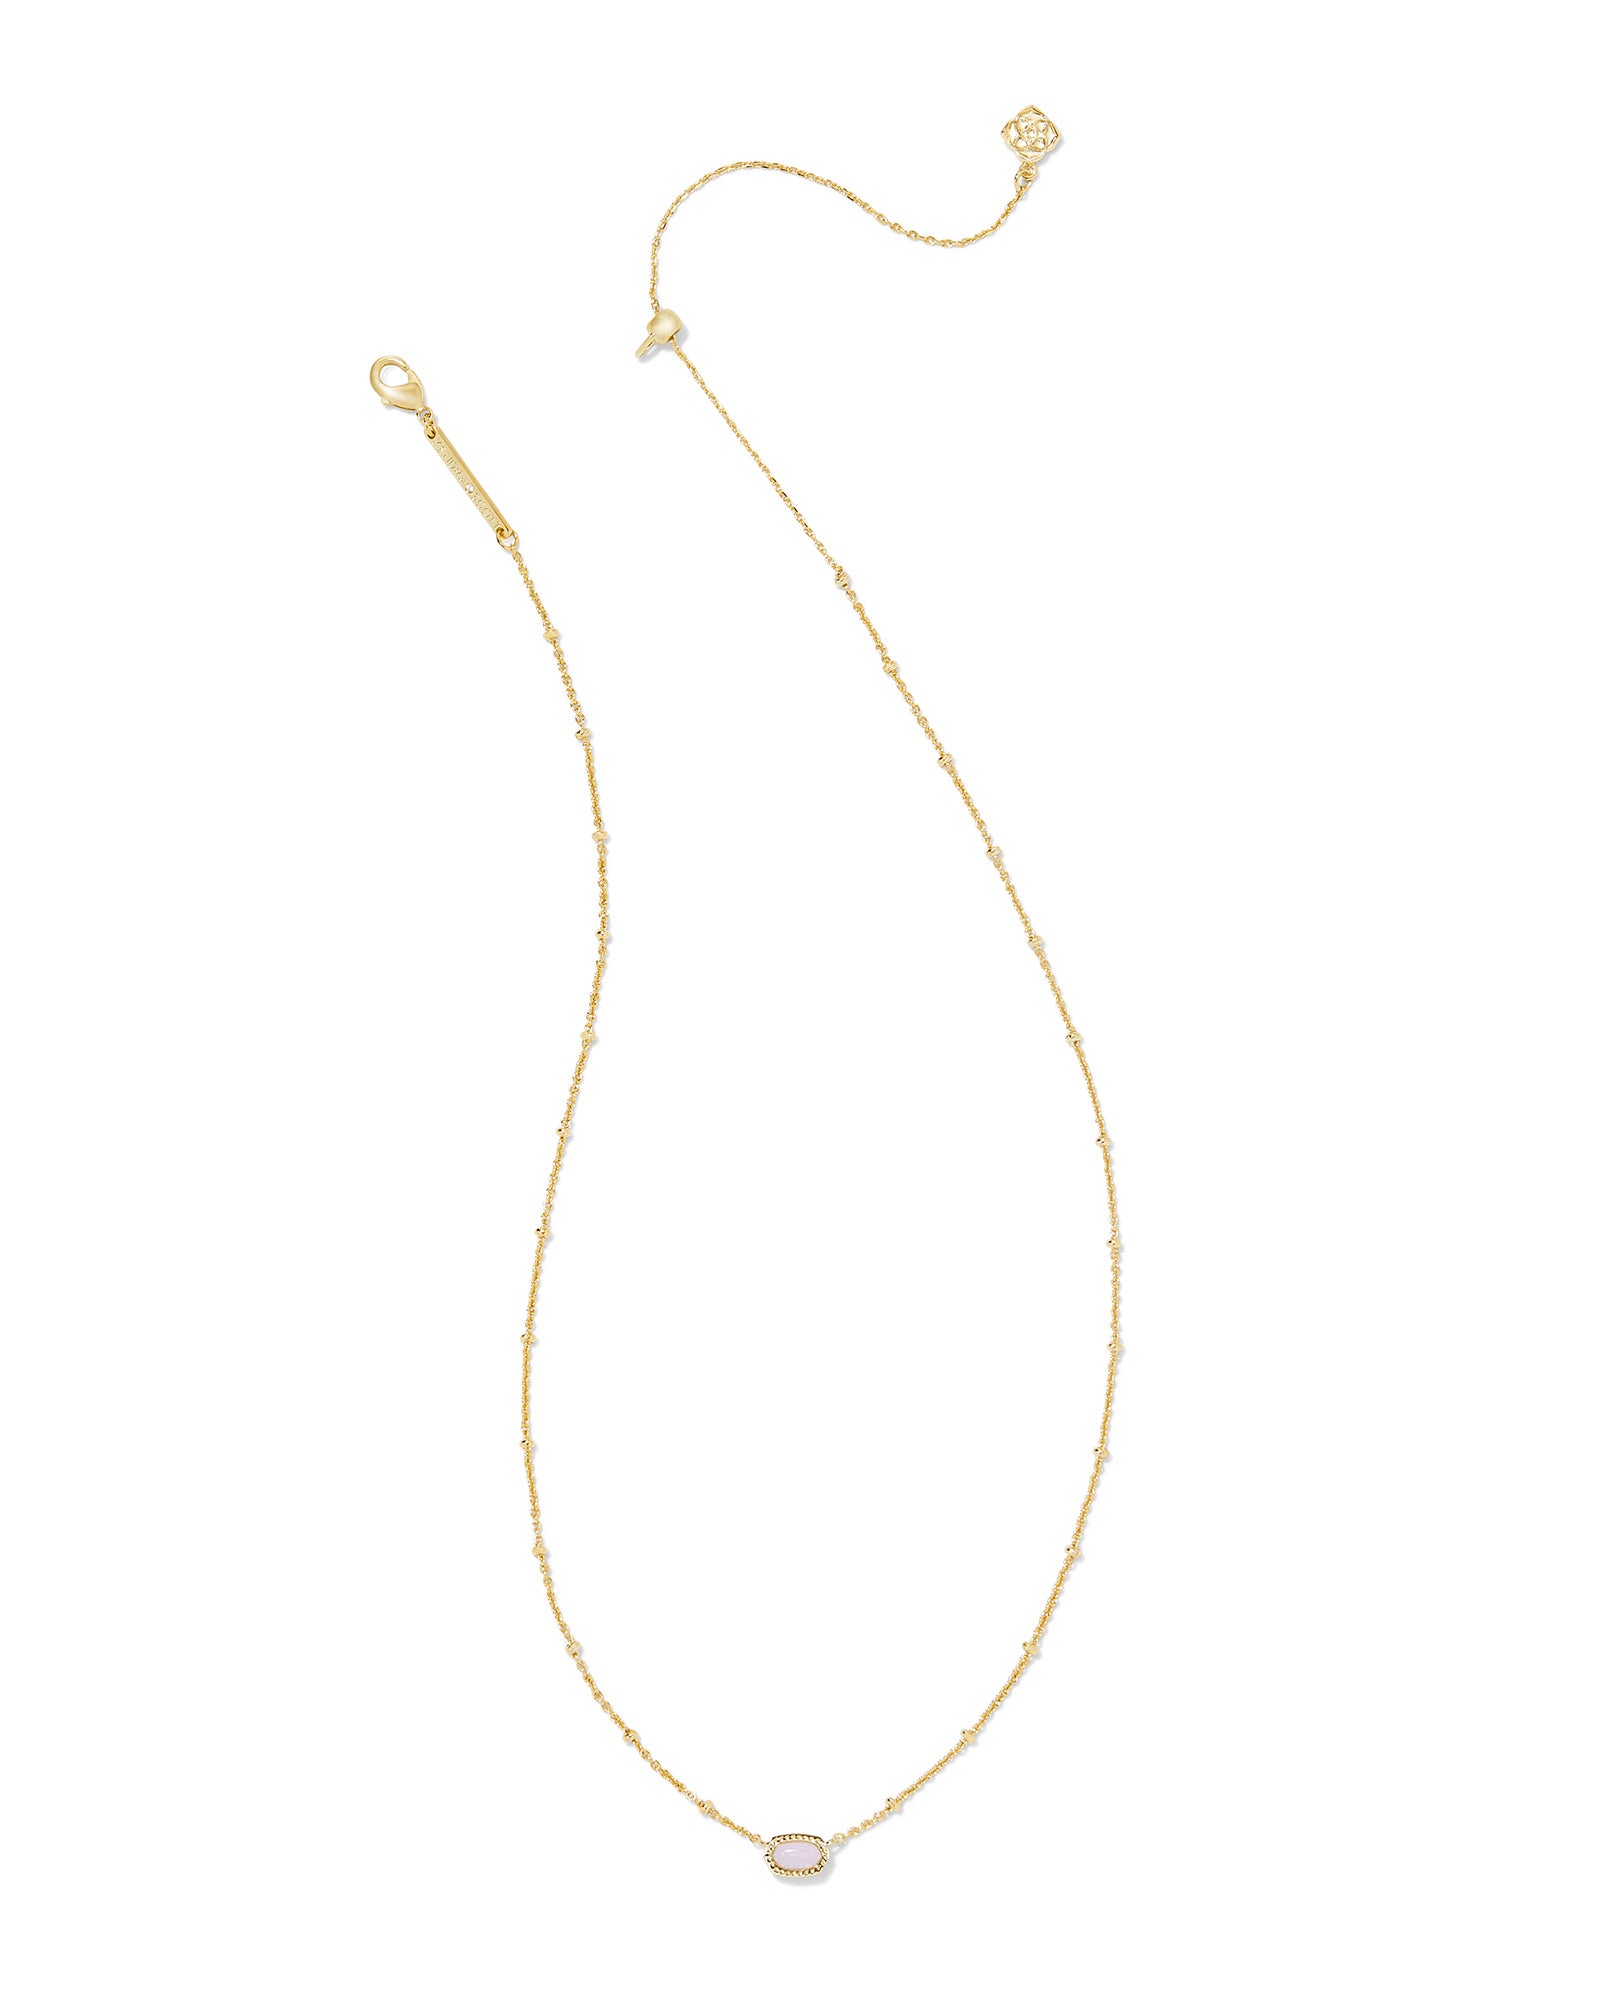 Kendra Scott |  Mini Elisa Gold Satellite Short Pendant Necklace in Pink Opalite Crystal - Giddy Up Glamour Boutique